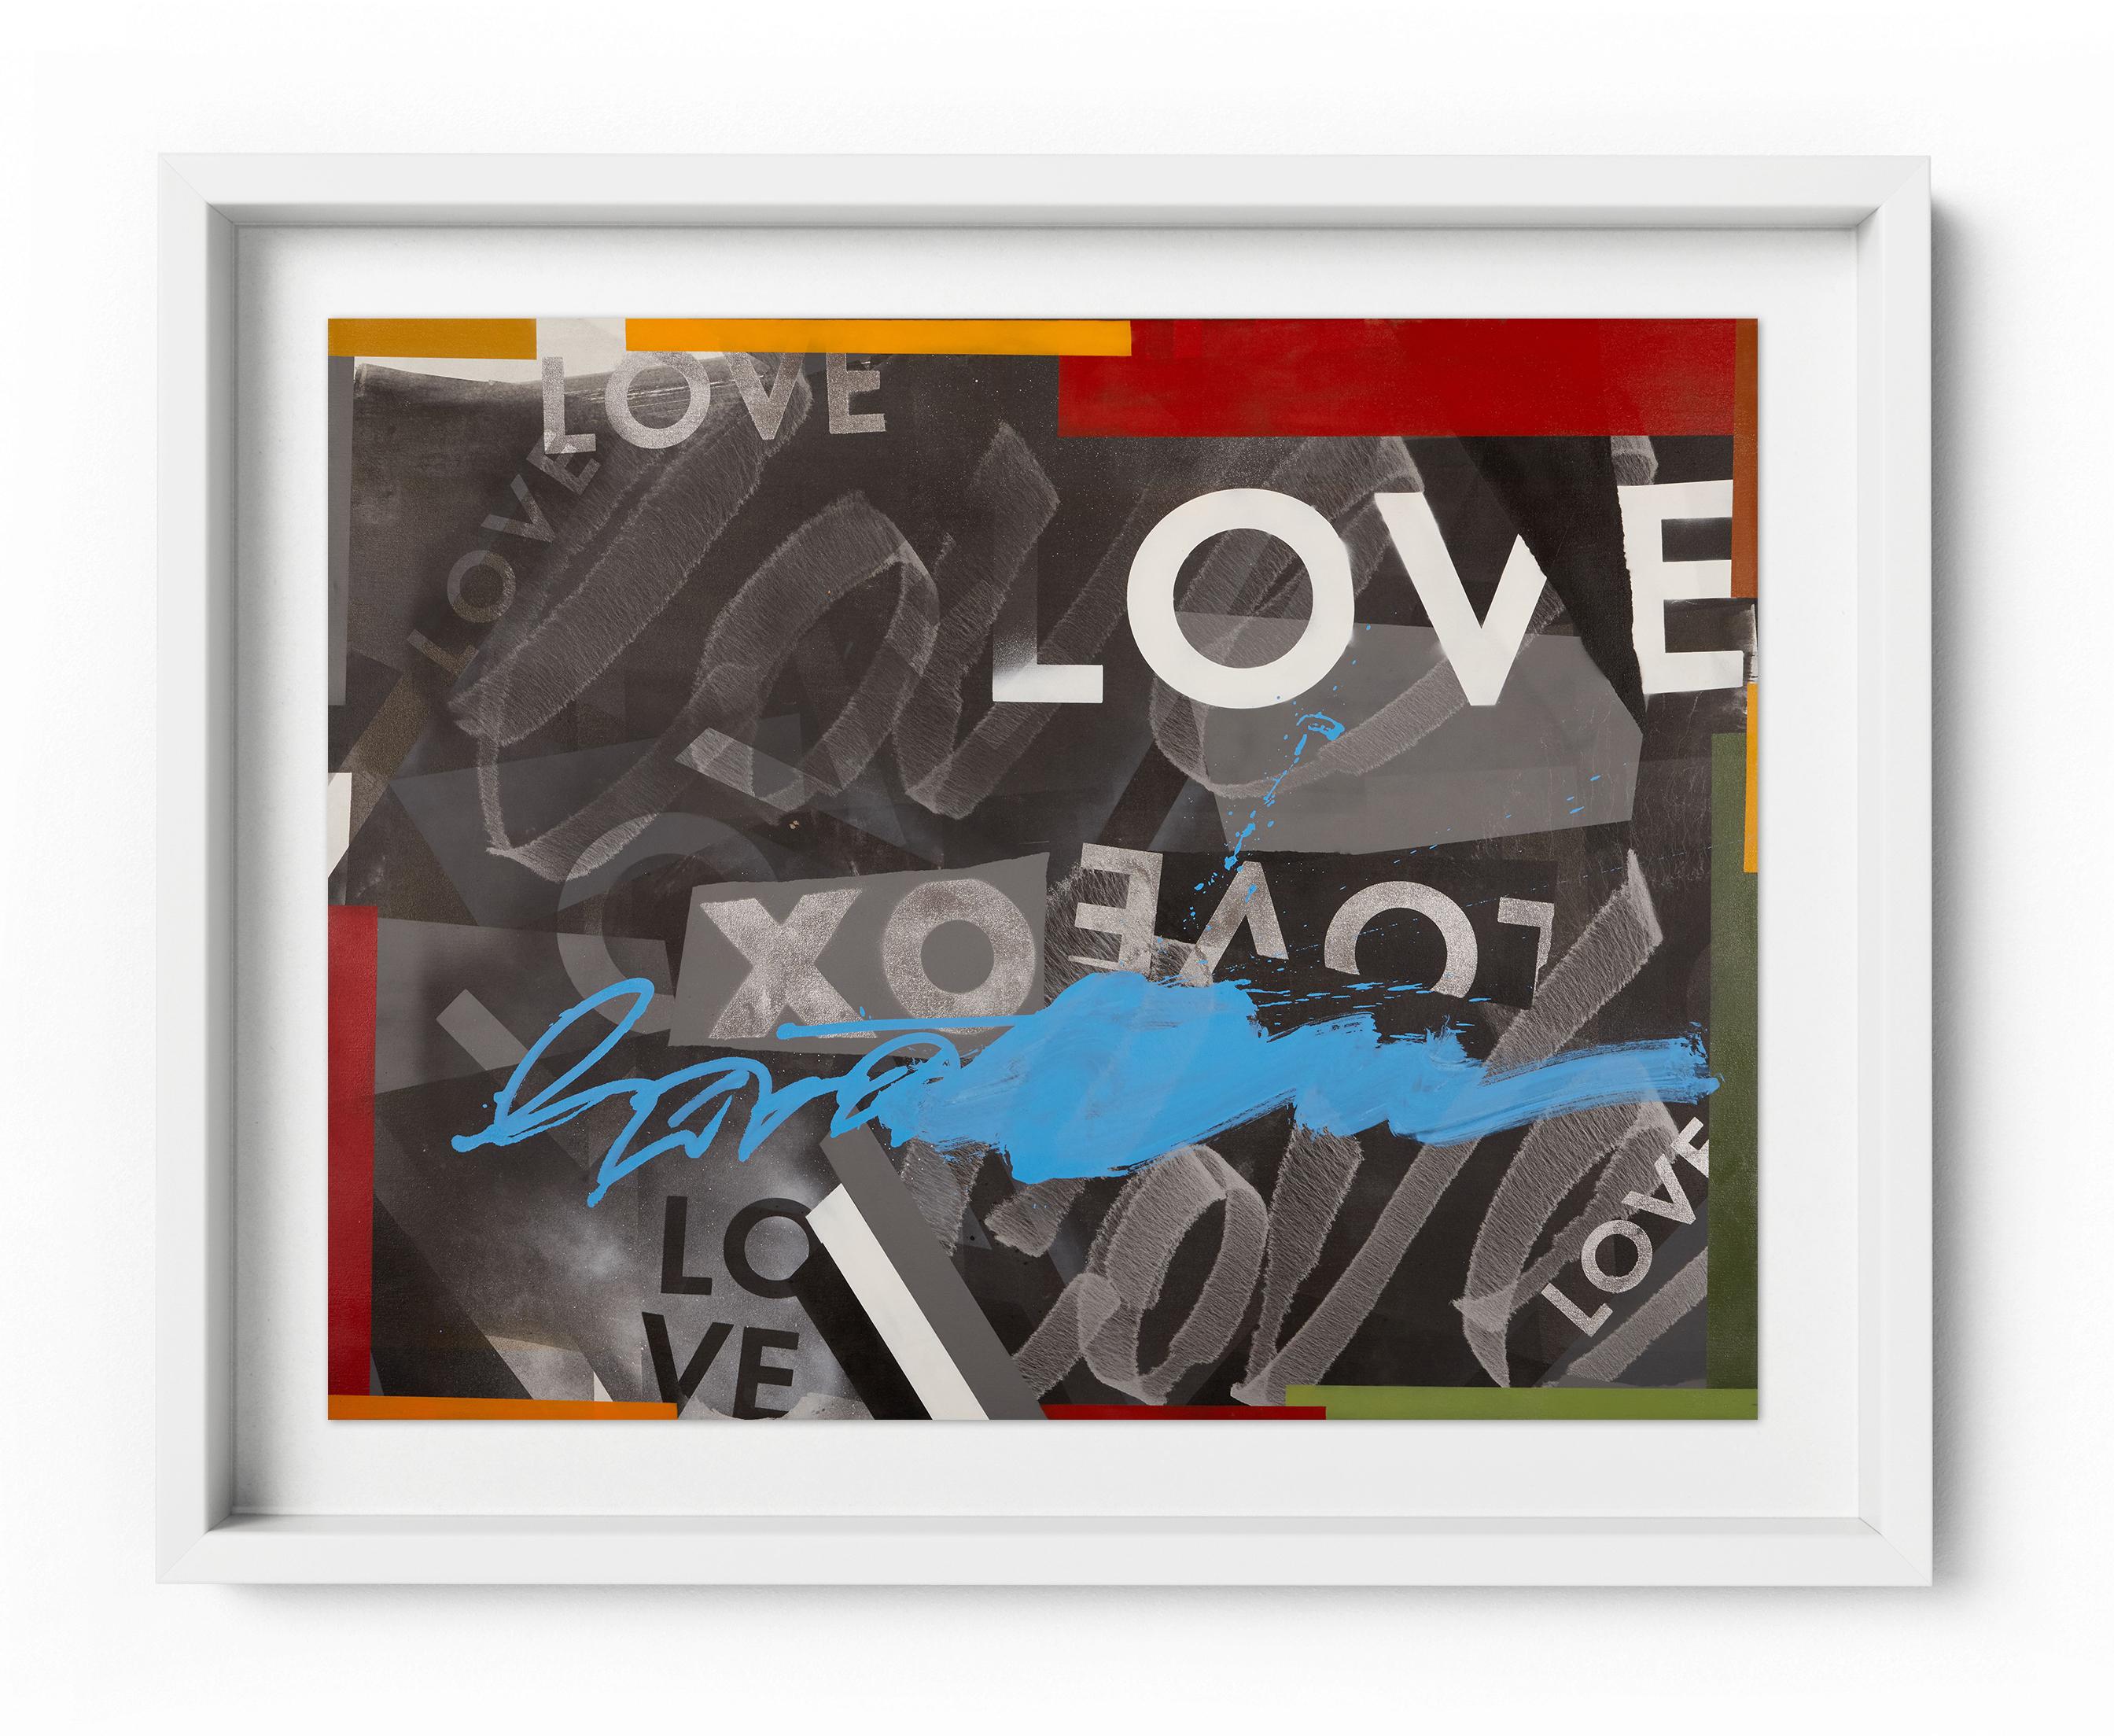 Get Love - Framed Limited Edition Print - Contemporary - Graffiti Inspired - Black Abstract Print by Karlos Marquez